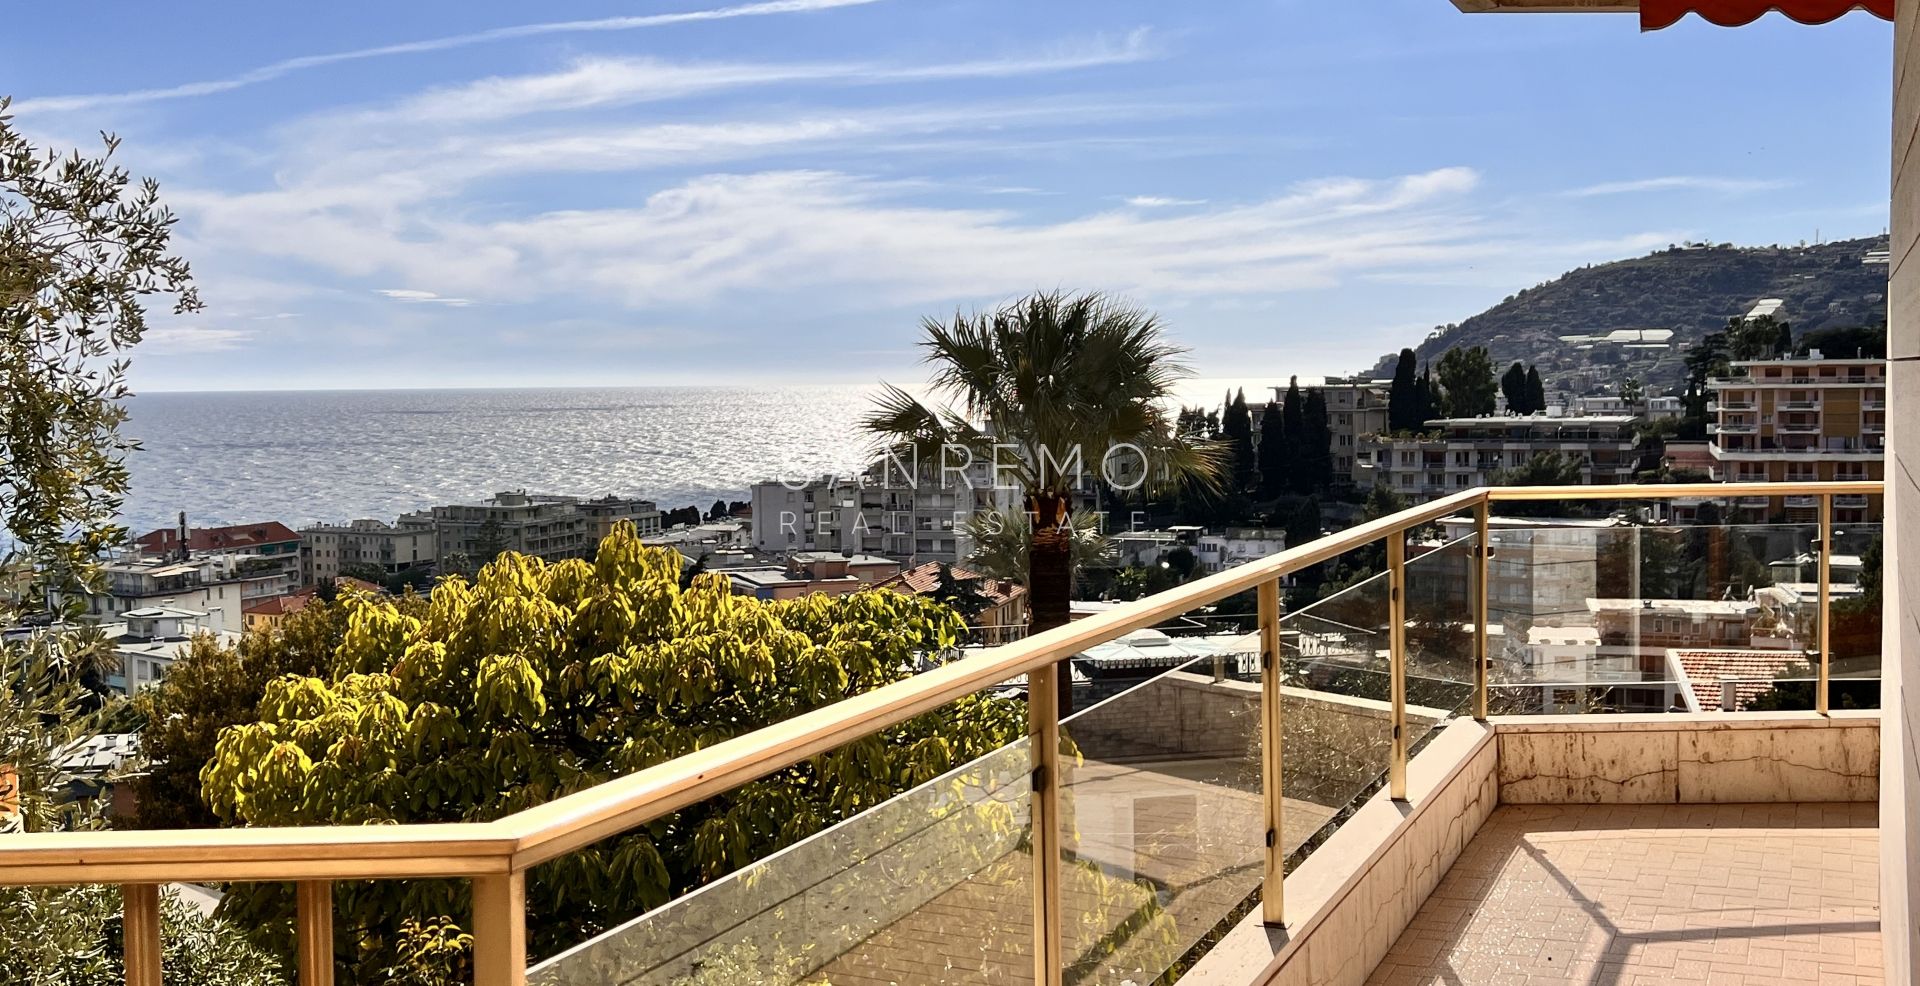 Bright 100 m2 apartment with sea view in a quiet area surrounded by greenery